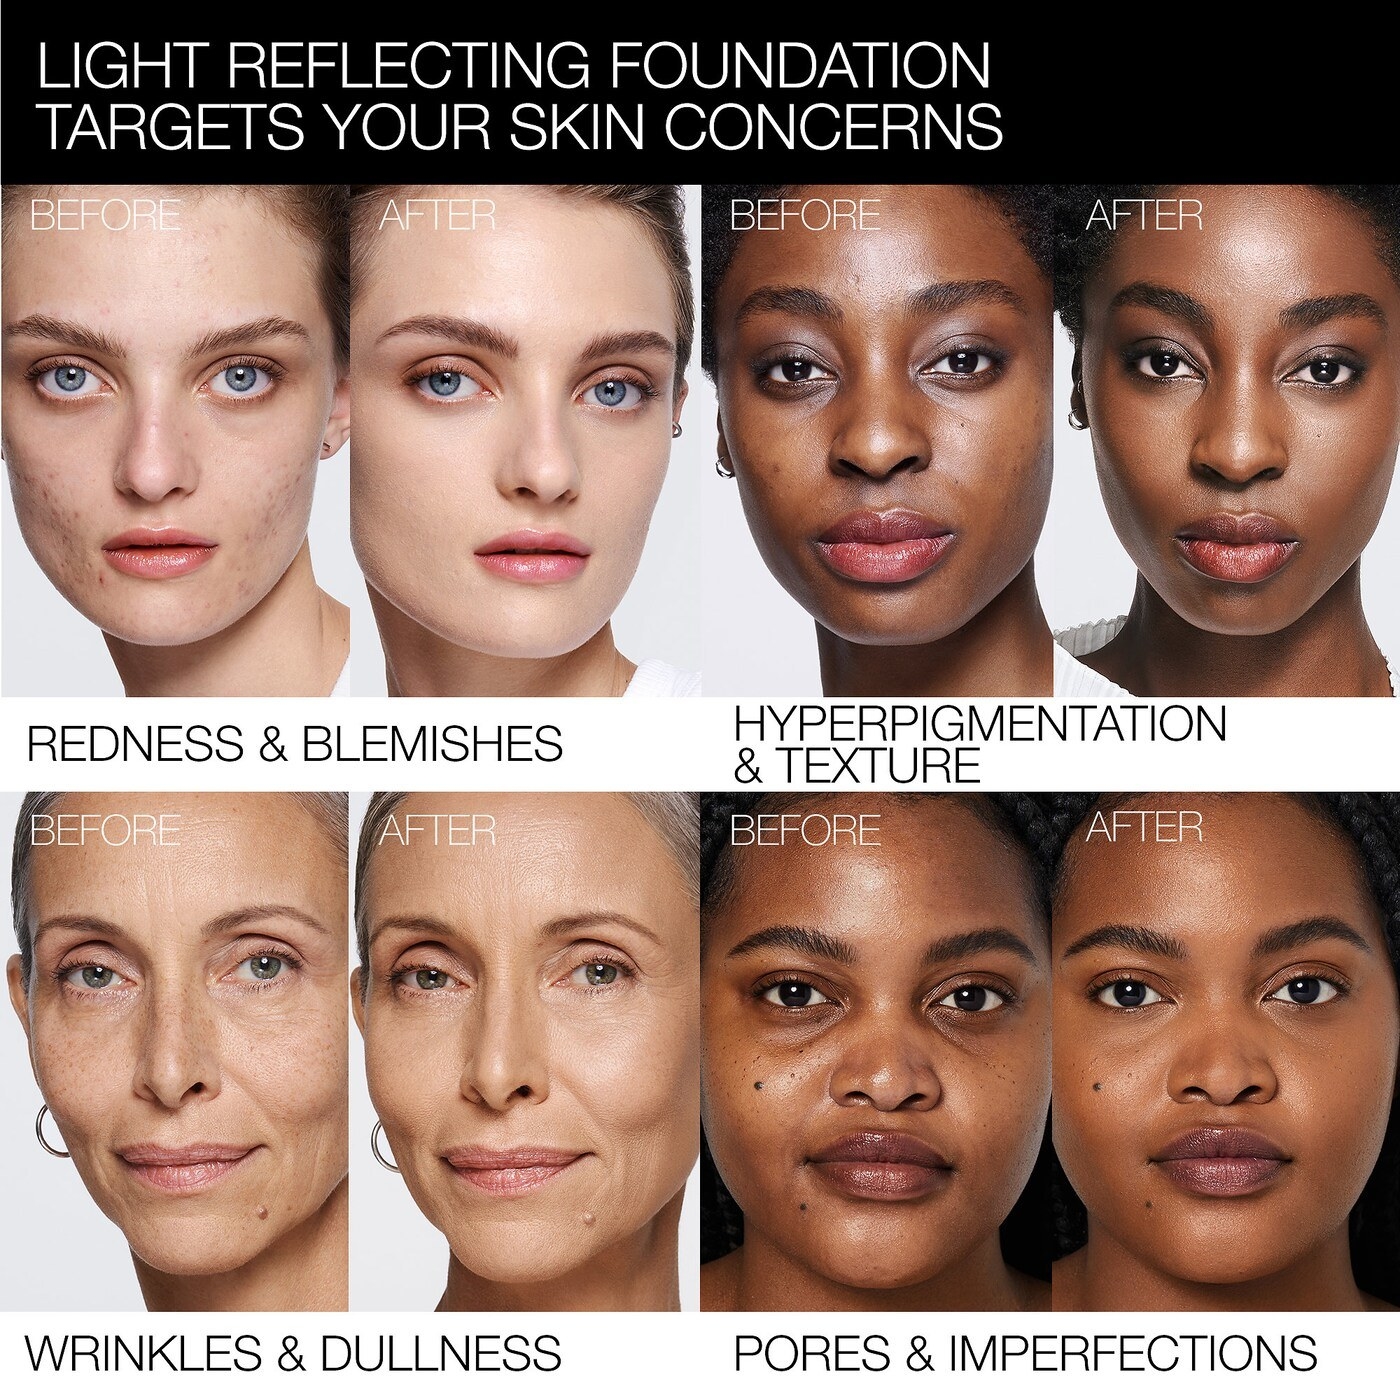 Models of different skintones with before and after photos